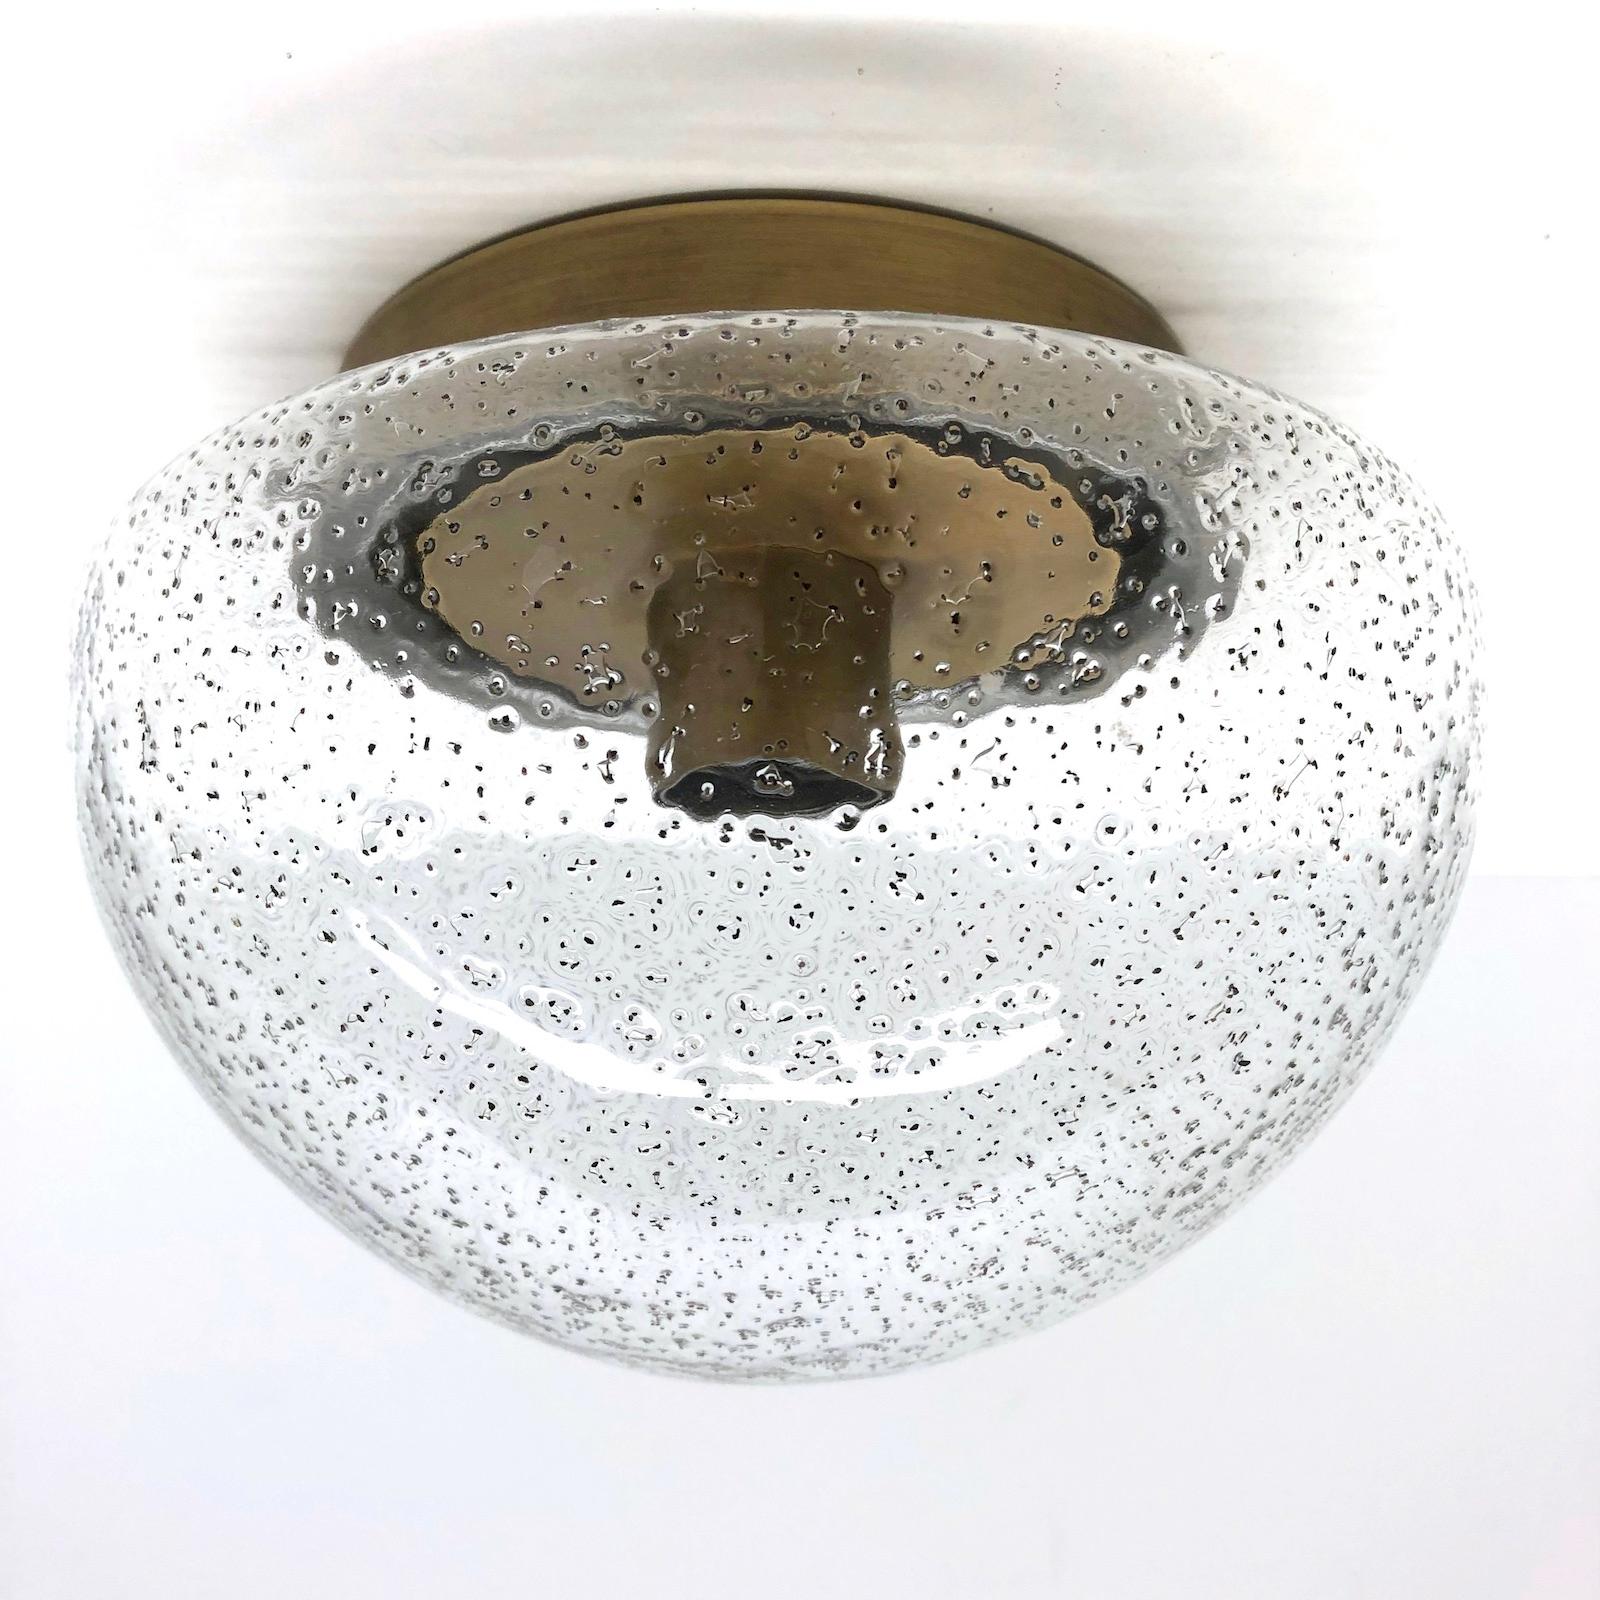 A gorgeous bronzed metal flush mount by Hillebrand. Nice Murano glass with lots of small black dots. The flush mount requires one European E27 Edison bulb, up to 75 watts.